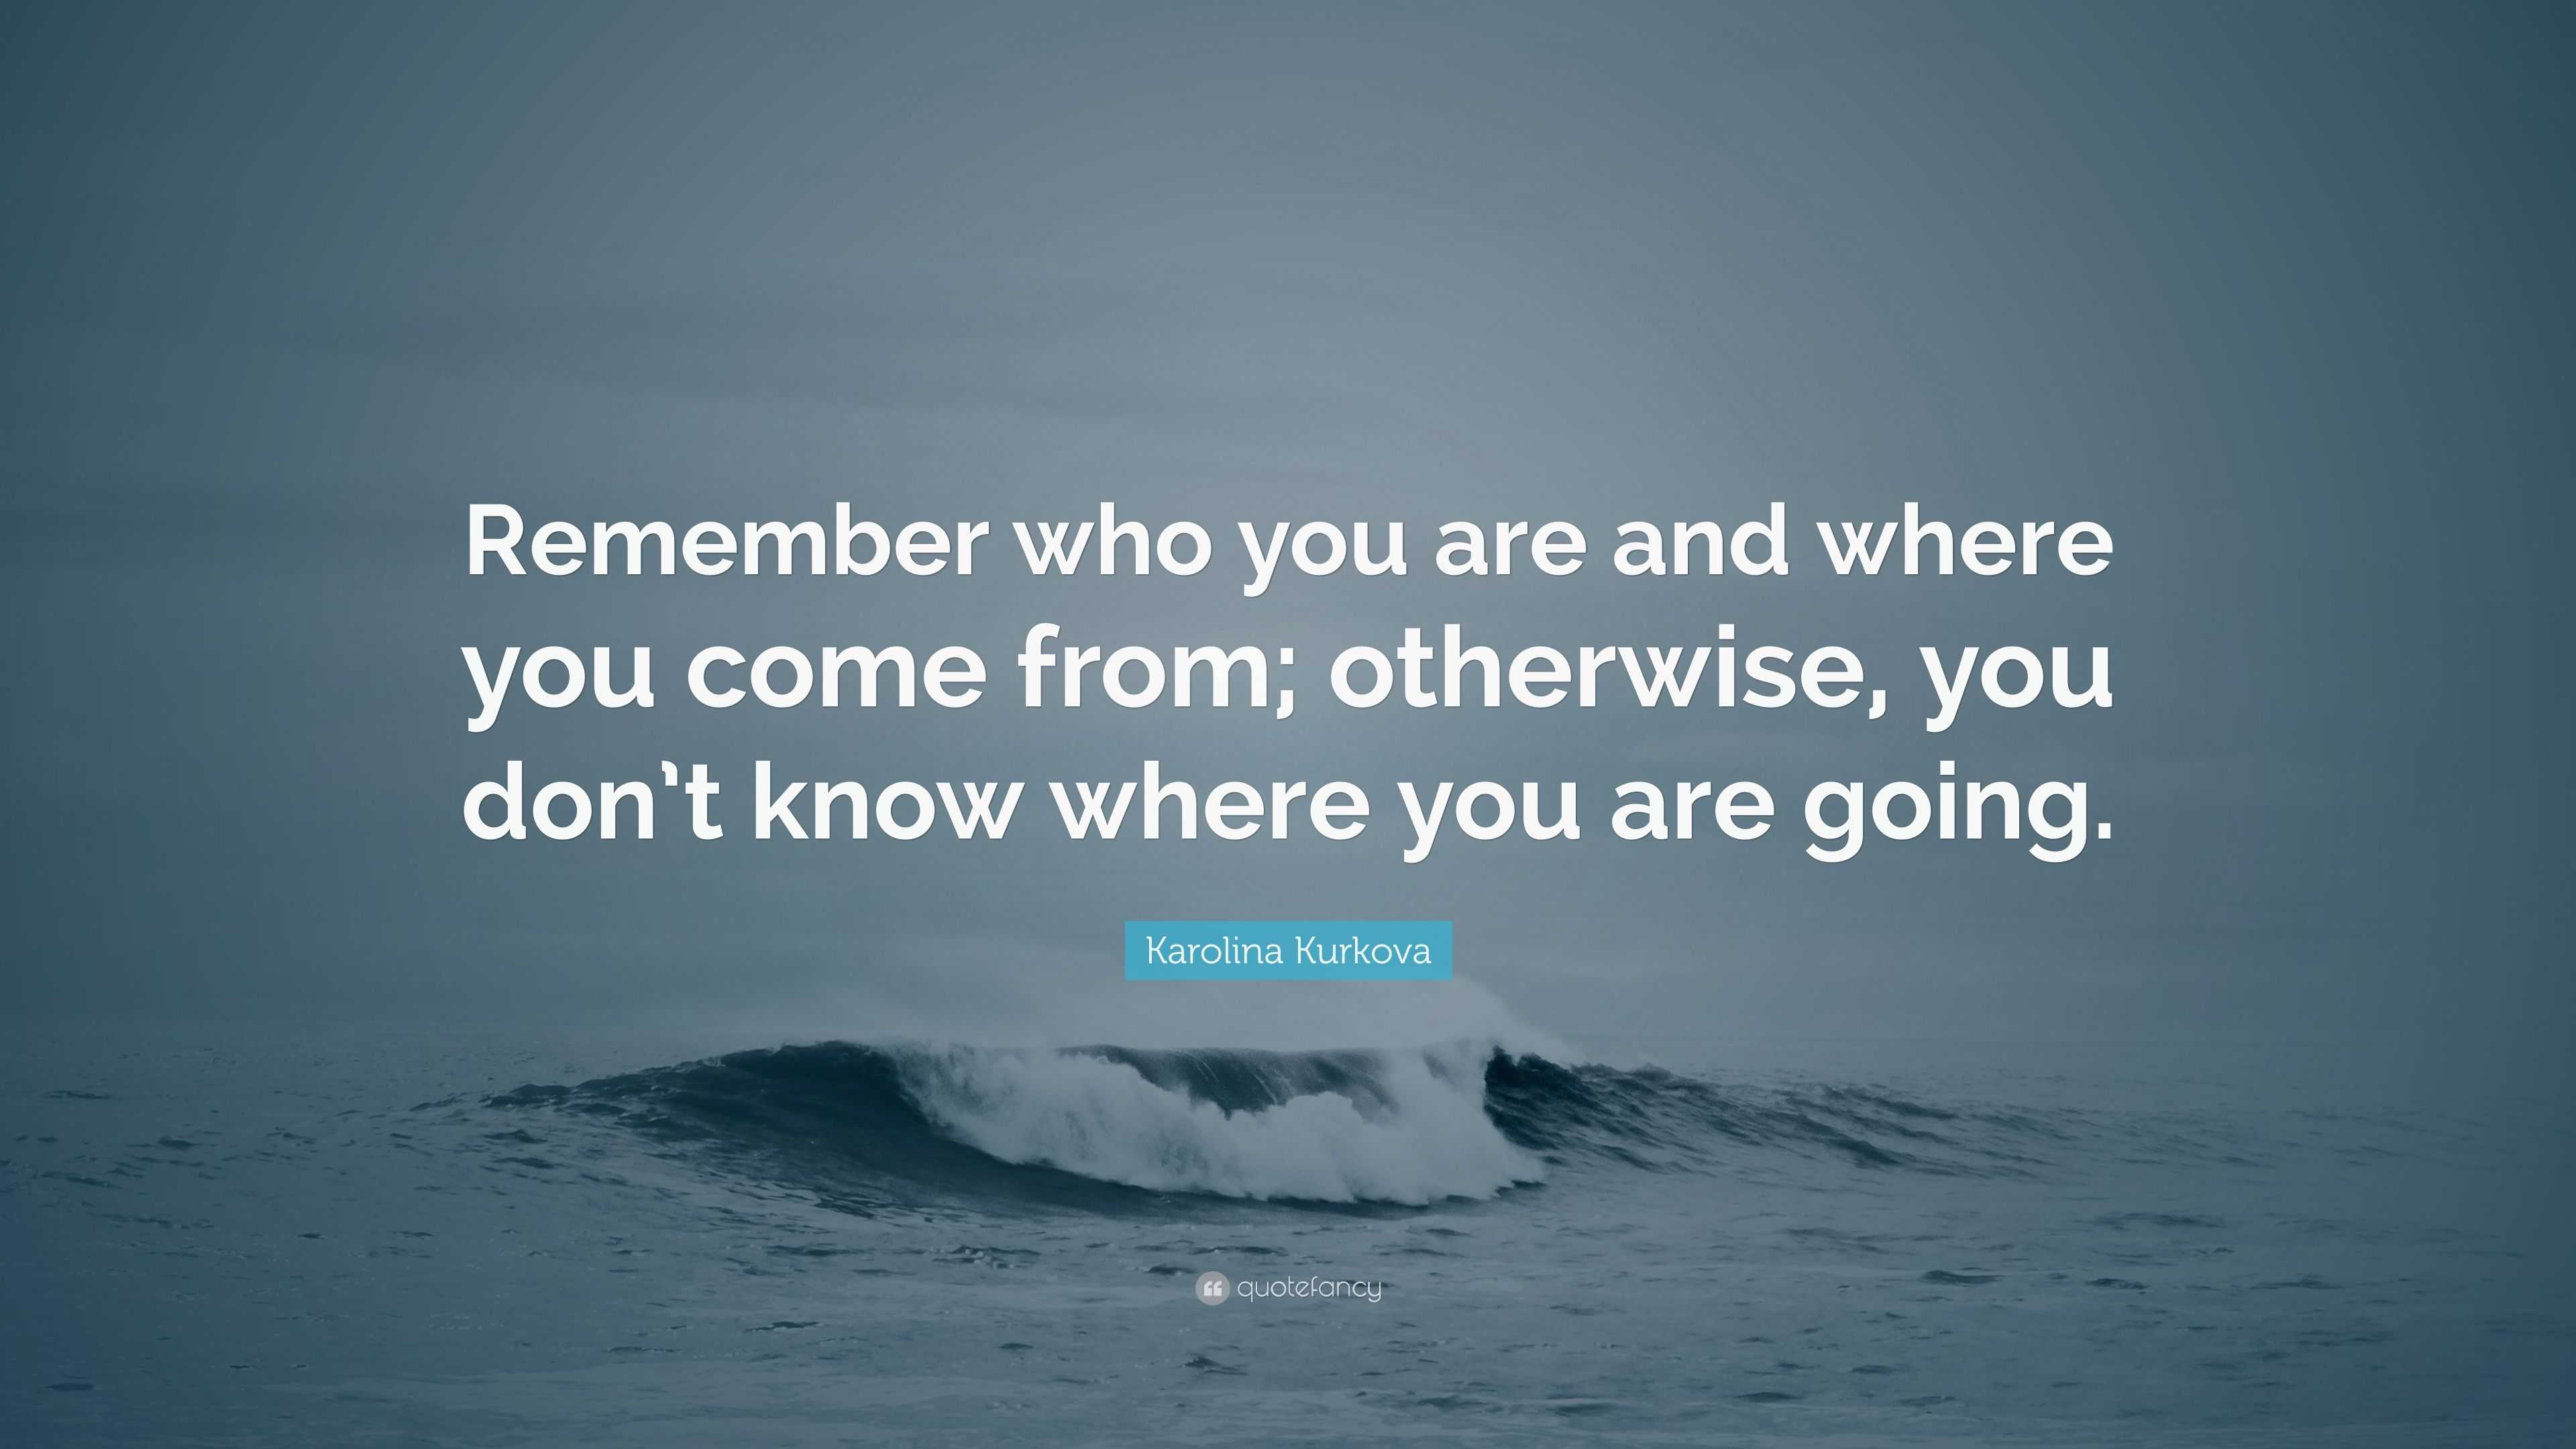 Karolina Kurkova Quote: “Remember who you are and where you come from ...